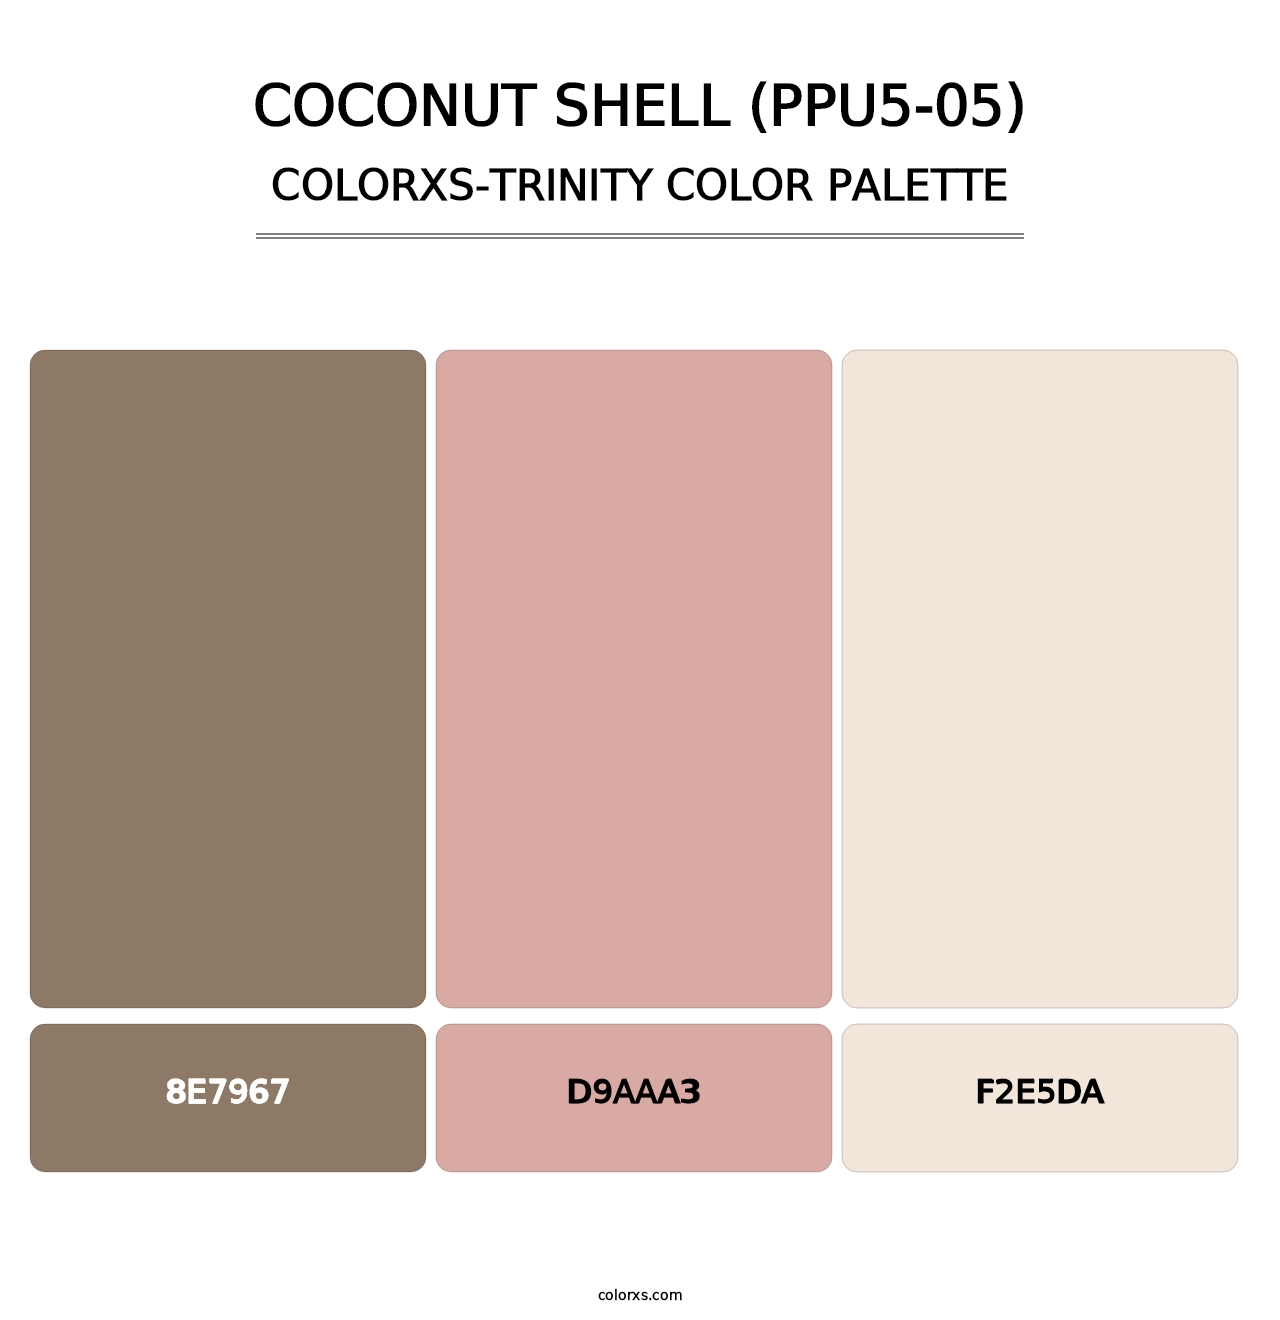 Coconut Shell (PPU5-05) - Colorxs Trinity Palette